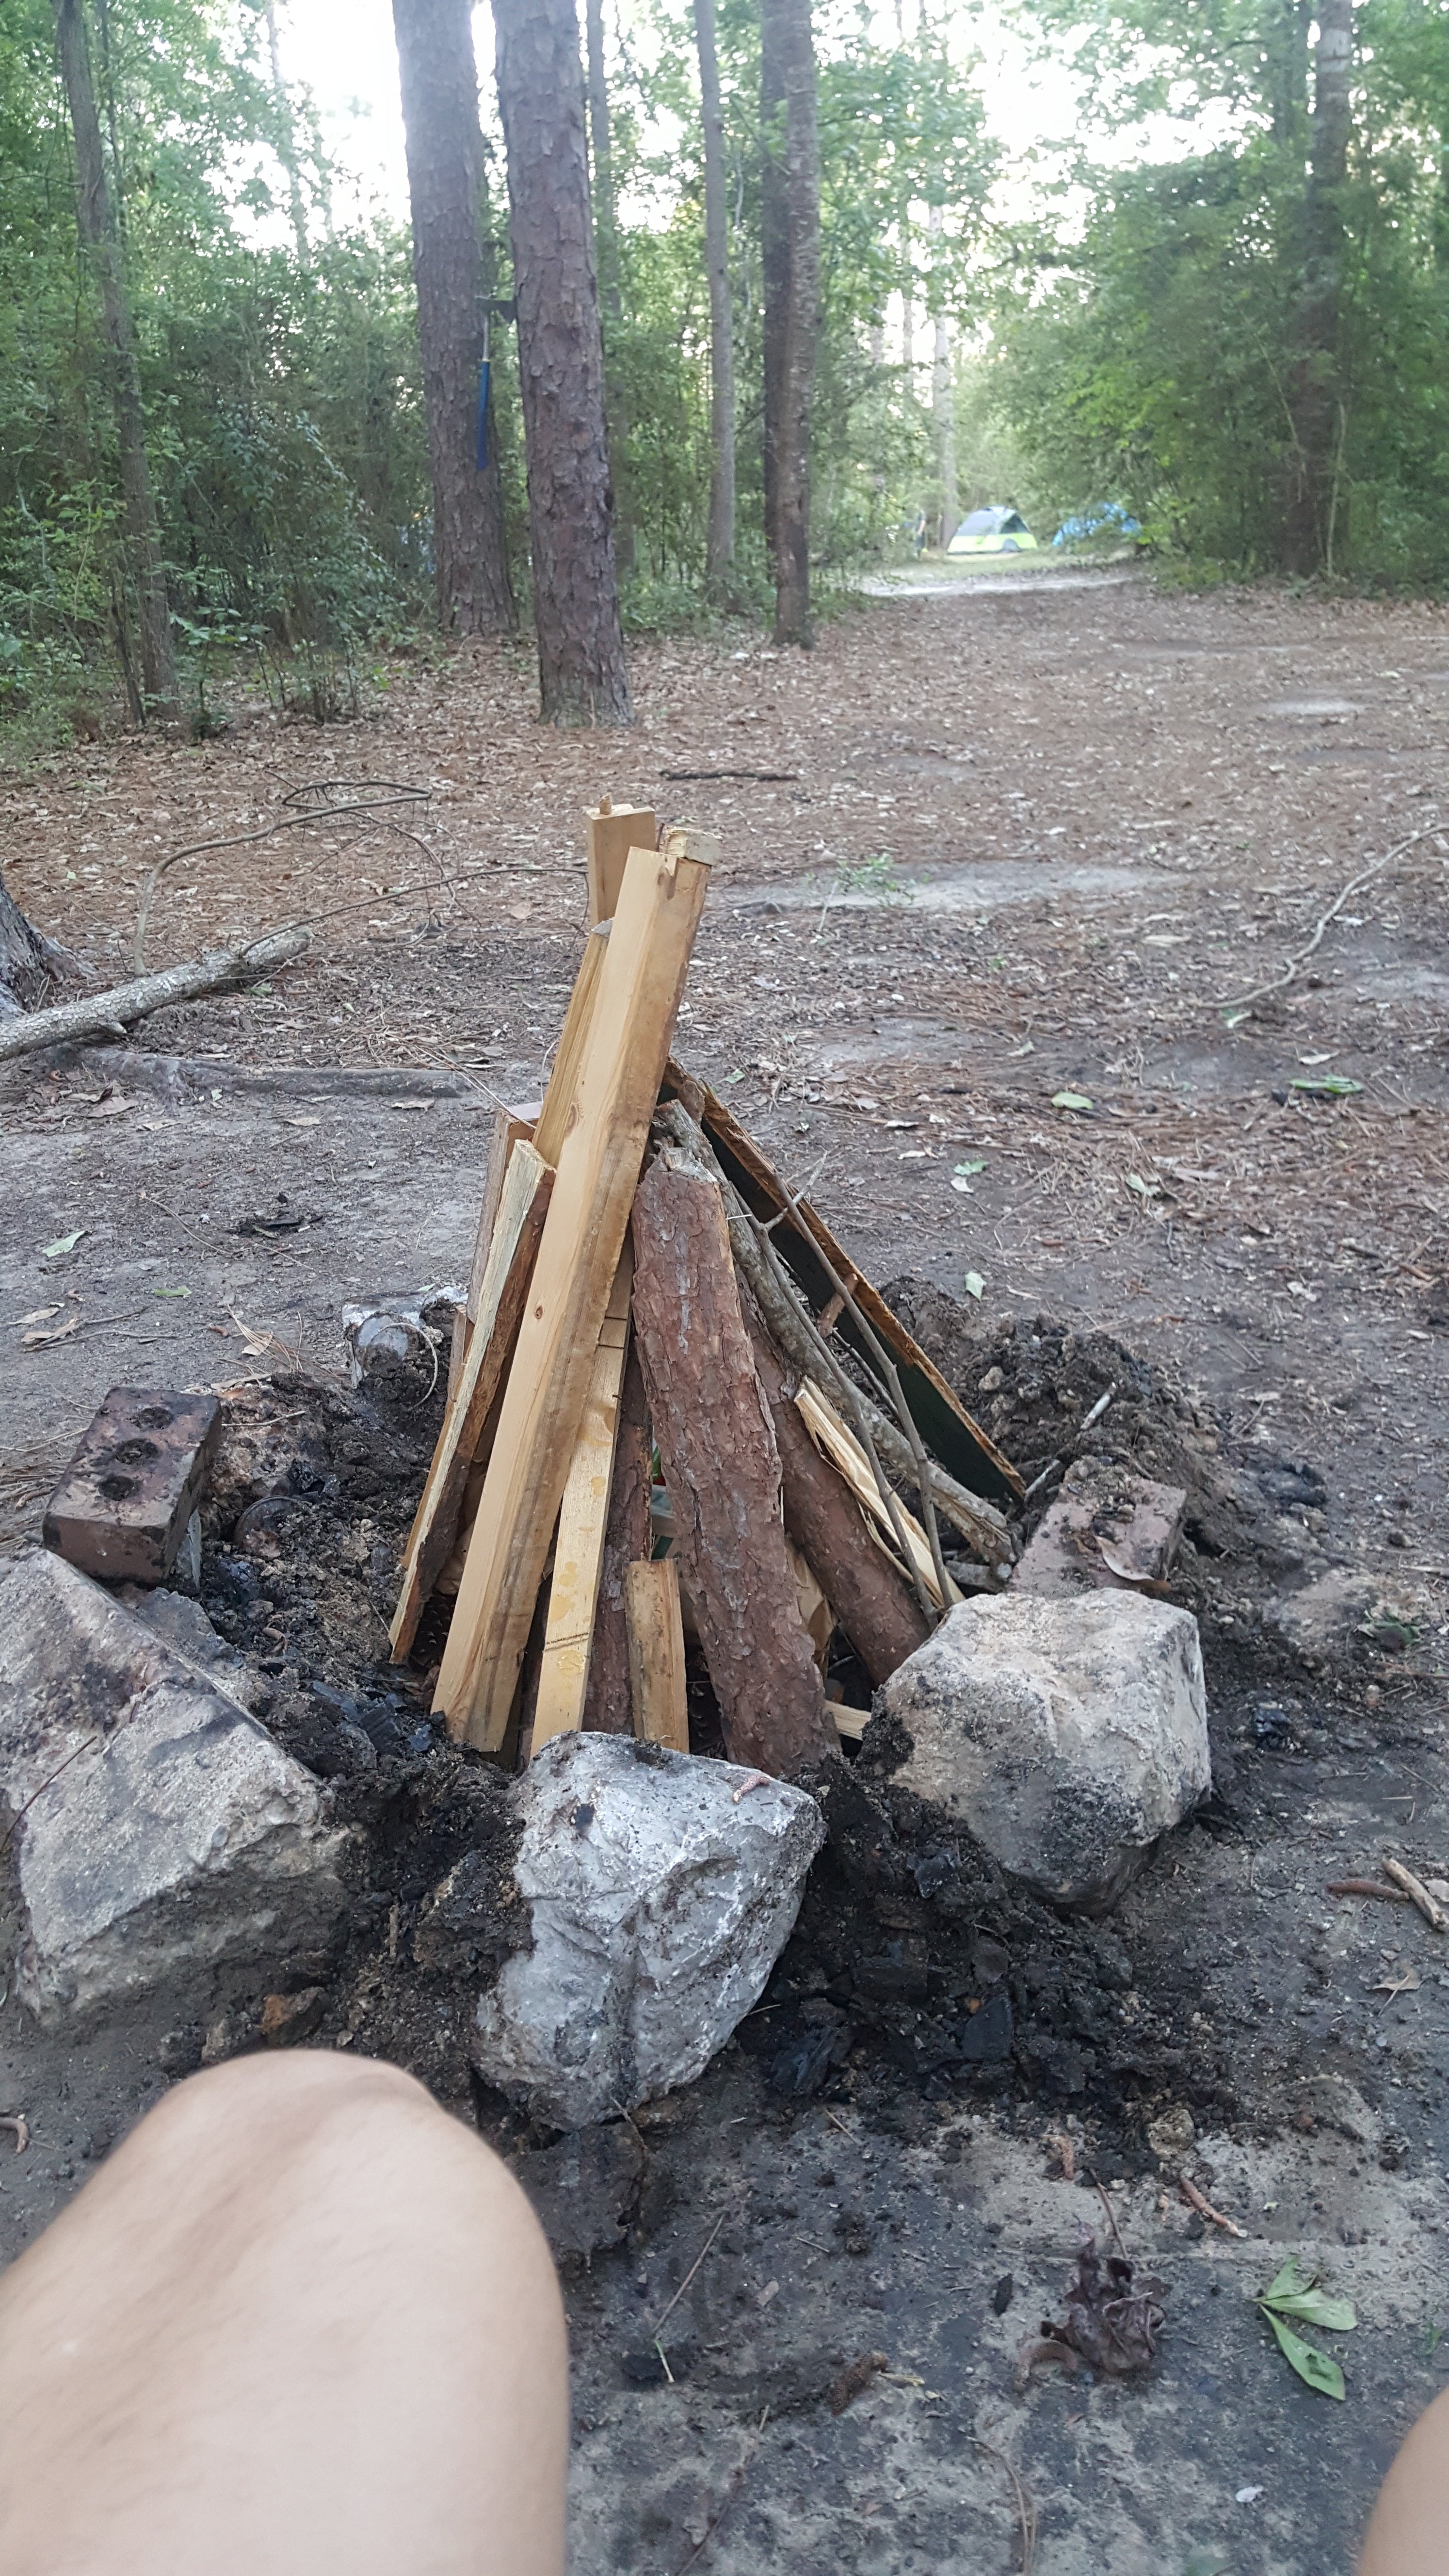 Found enough rocks around the campsite to make a fire ring which is always a plus to any campfire experience.
